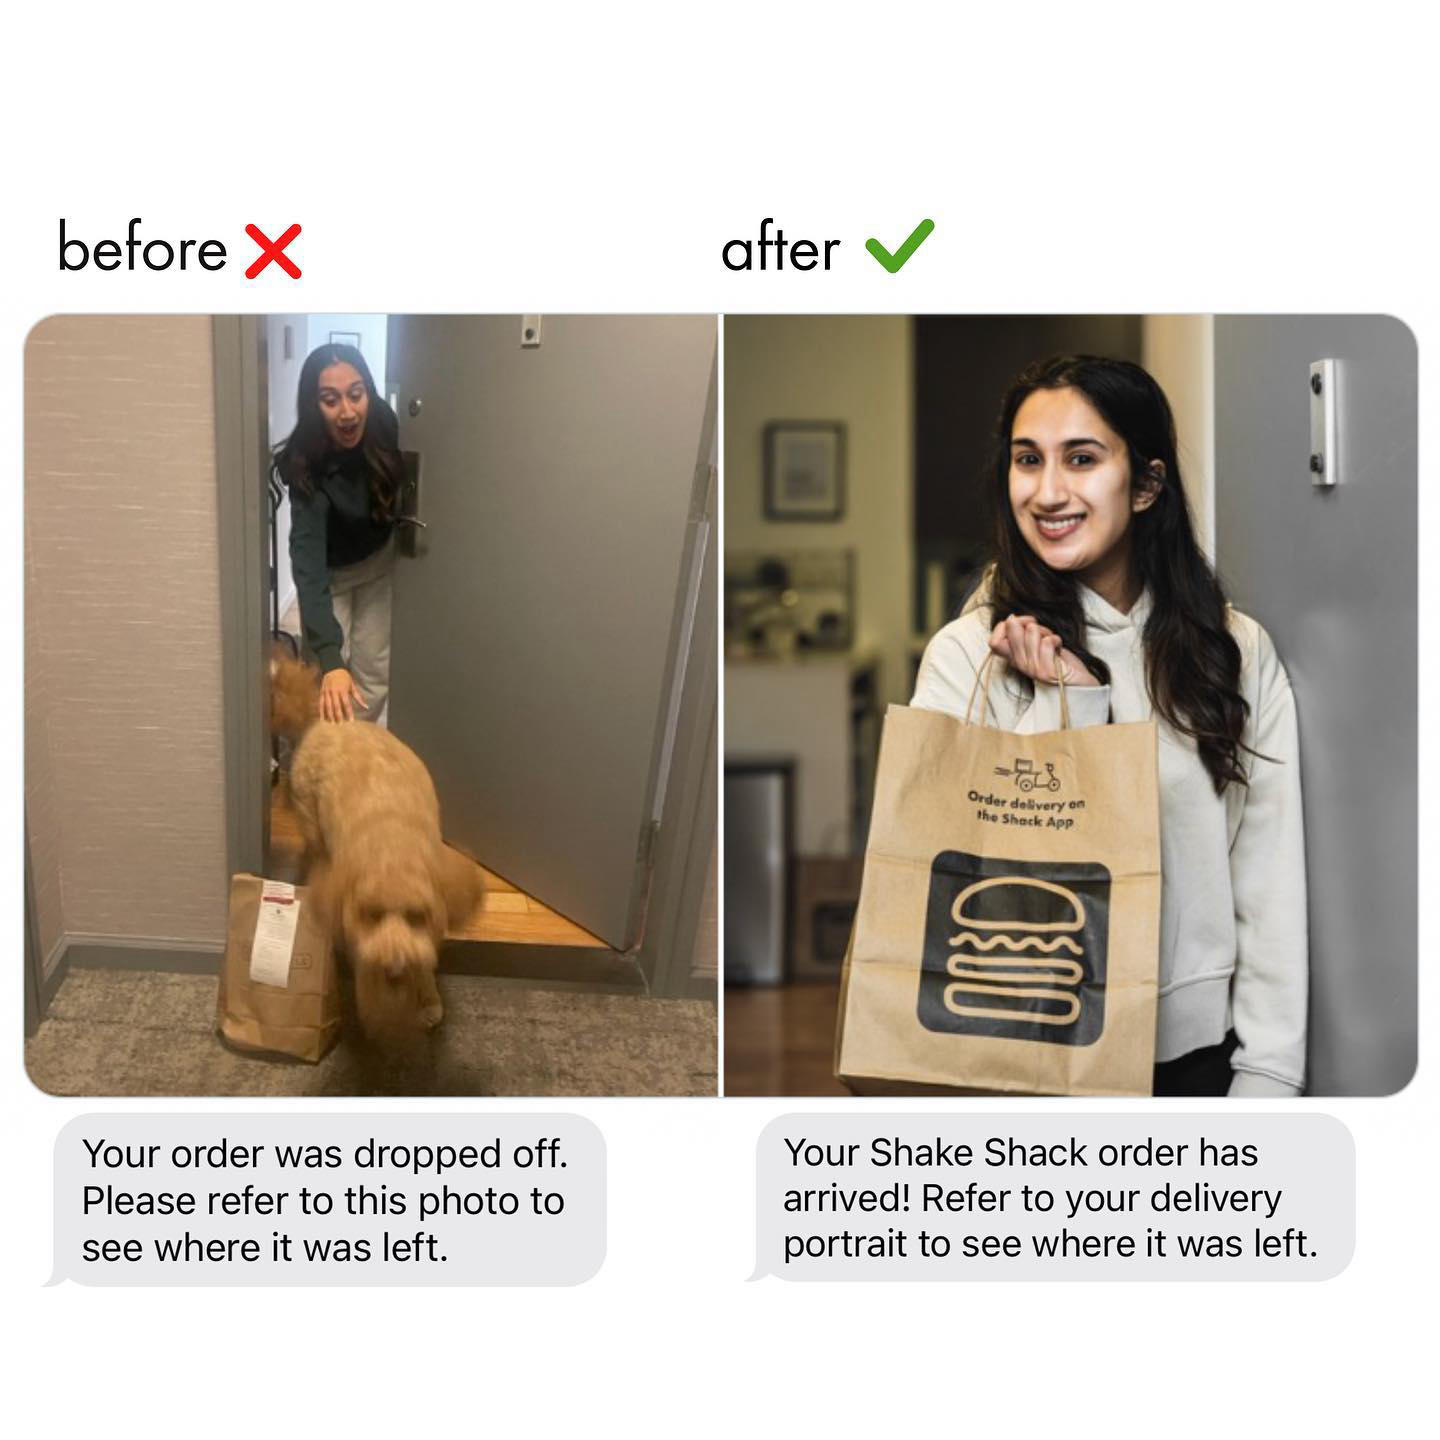 It’s time to put an end to bad 'proof of delivery' photos